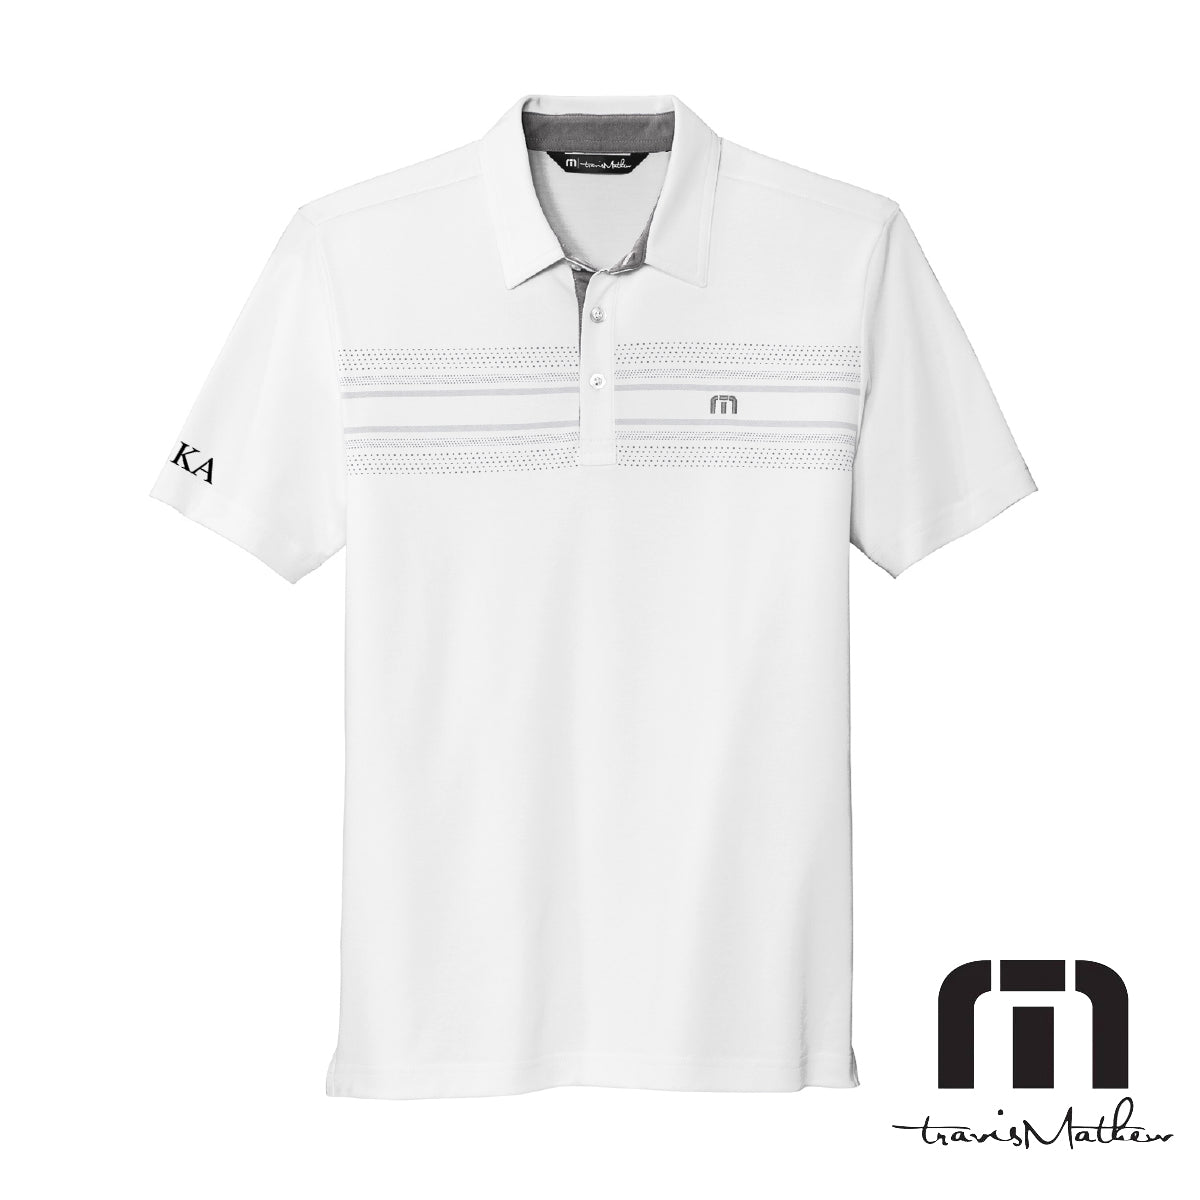 Kappa Alpha Travis Mathew Embroidered Chest Stripe Polo – Kappa Alpha Official Store